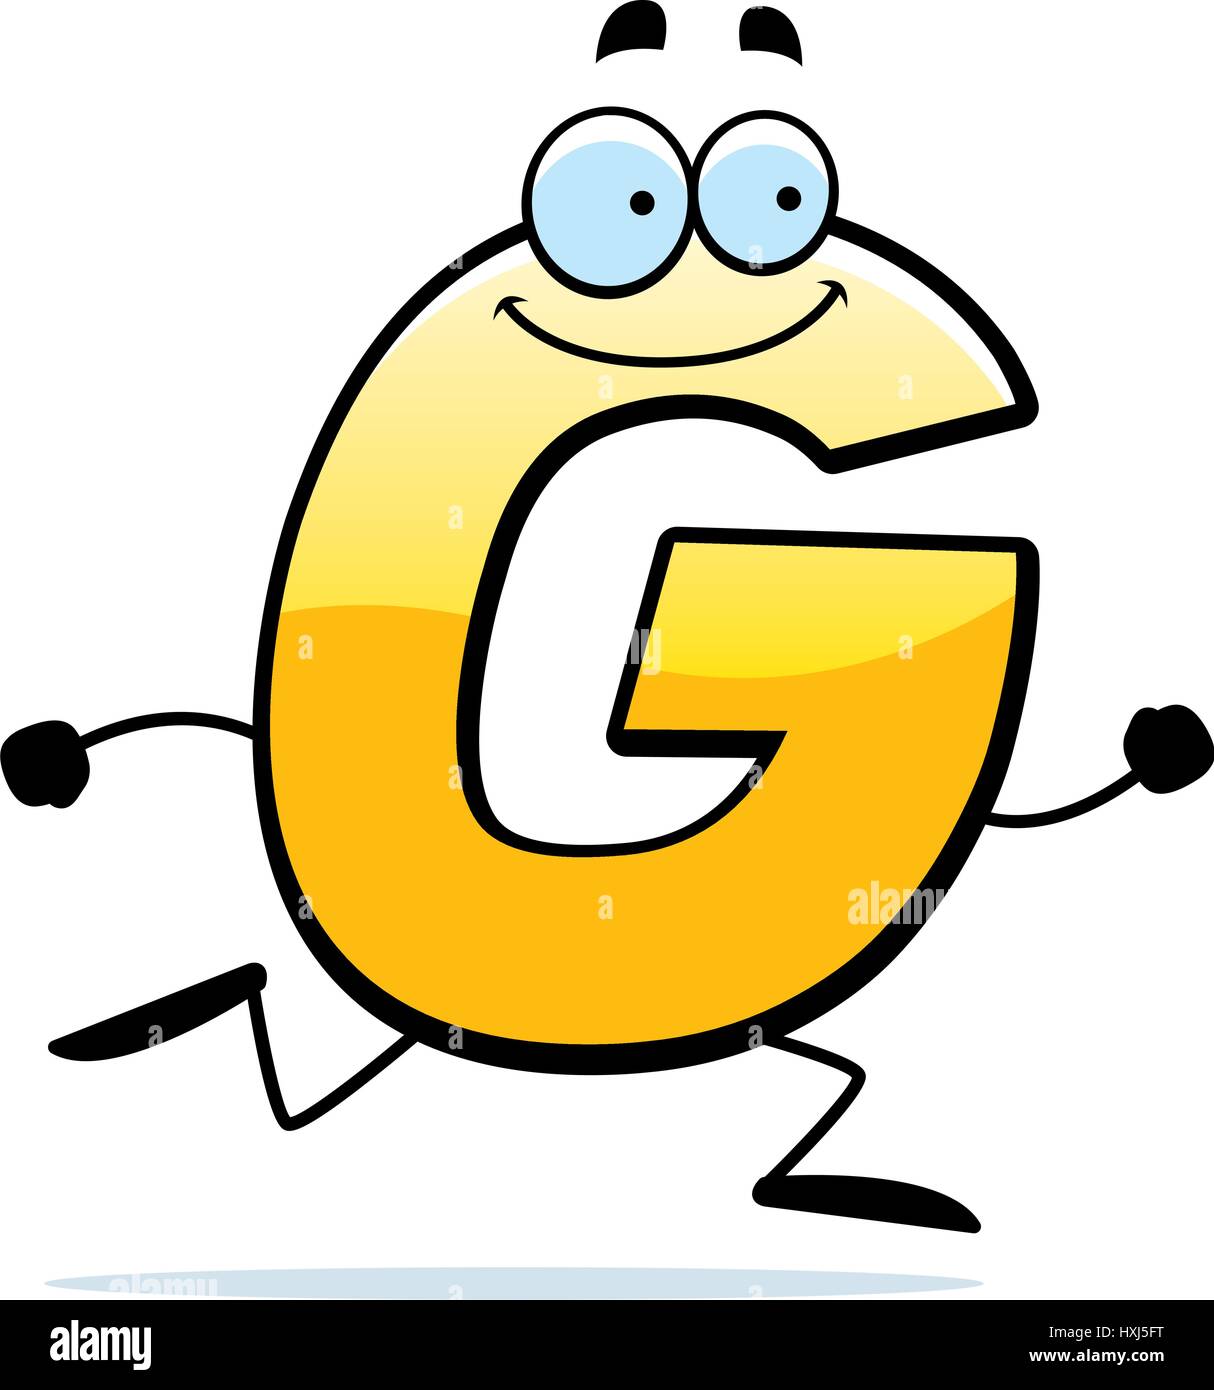 A cartoon illustration of a letter G running and smiling. Stock Vector